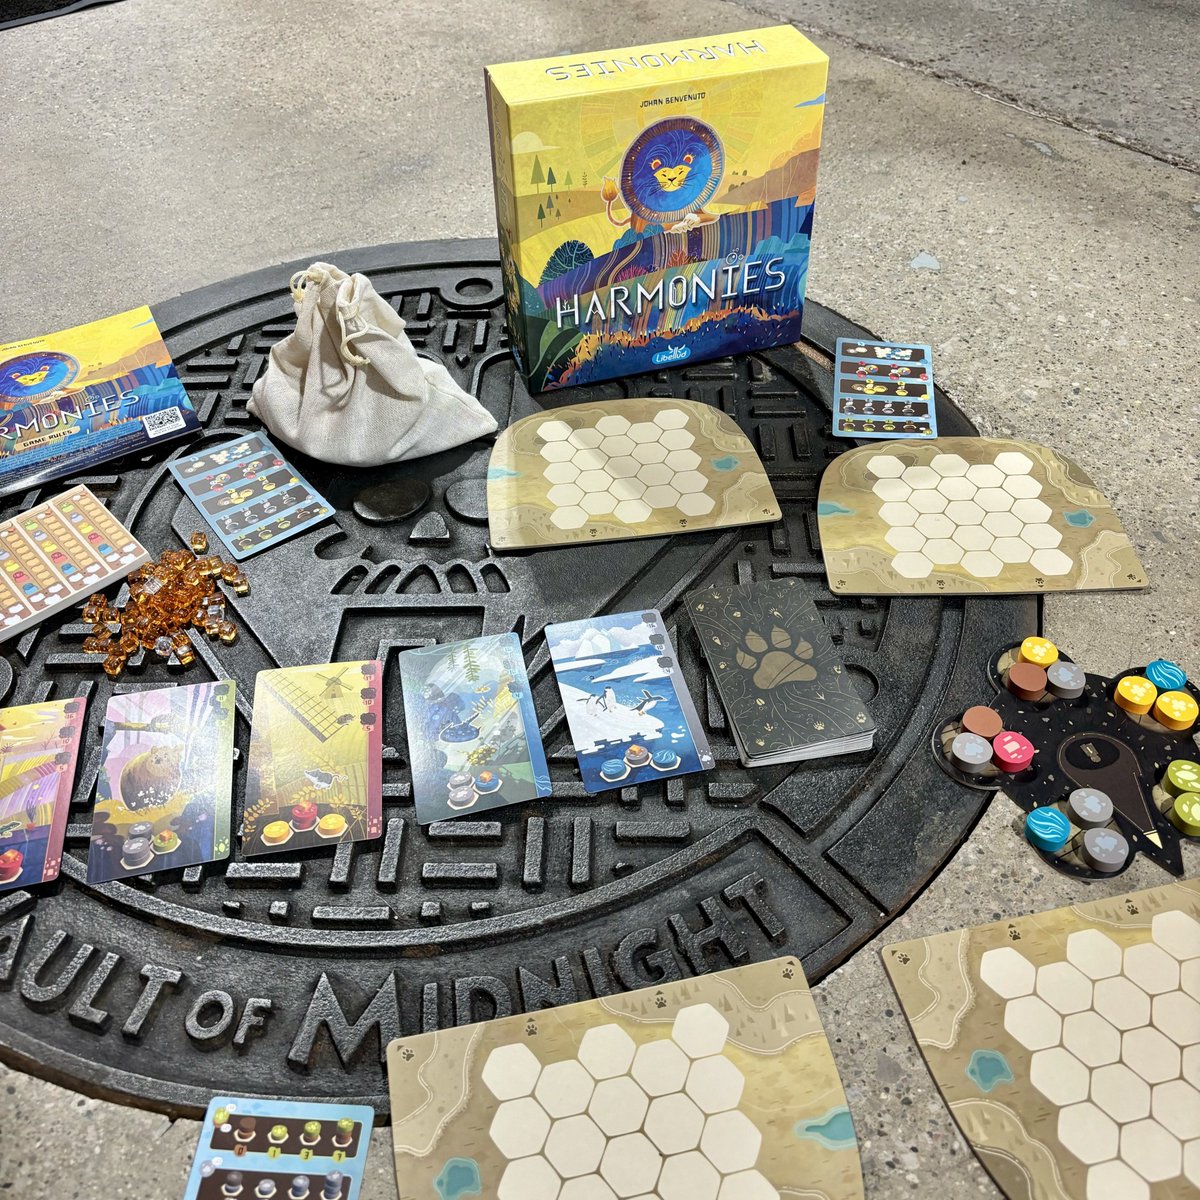 Harmonies captivates up to 4 players with its innovative mechanics: 3D landscape creation, tile placement, and pattern development. You need this for your next game night! 🌿🦁 Harmonies is available right now at Vaults of Midnight and at vaultofmidnight.shop @Libellud